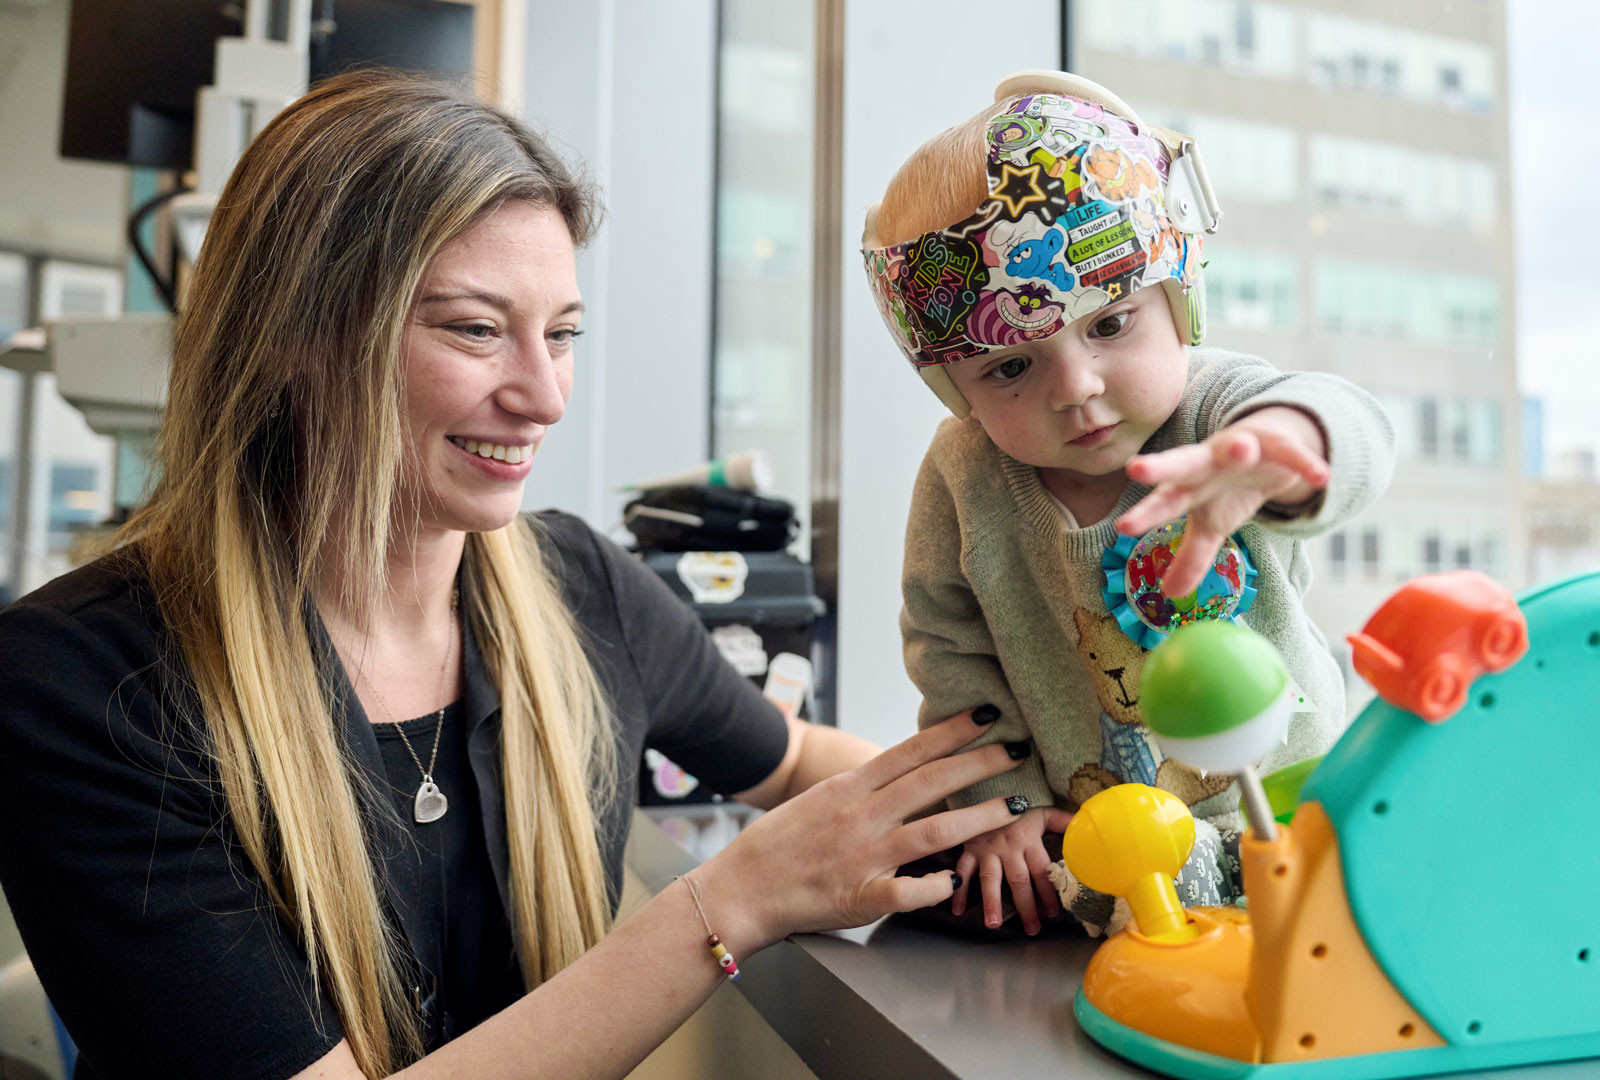 Smiling provider lightly holding and watching over child wearing helmet and playing with toy